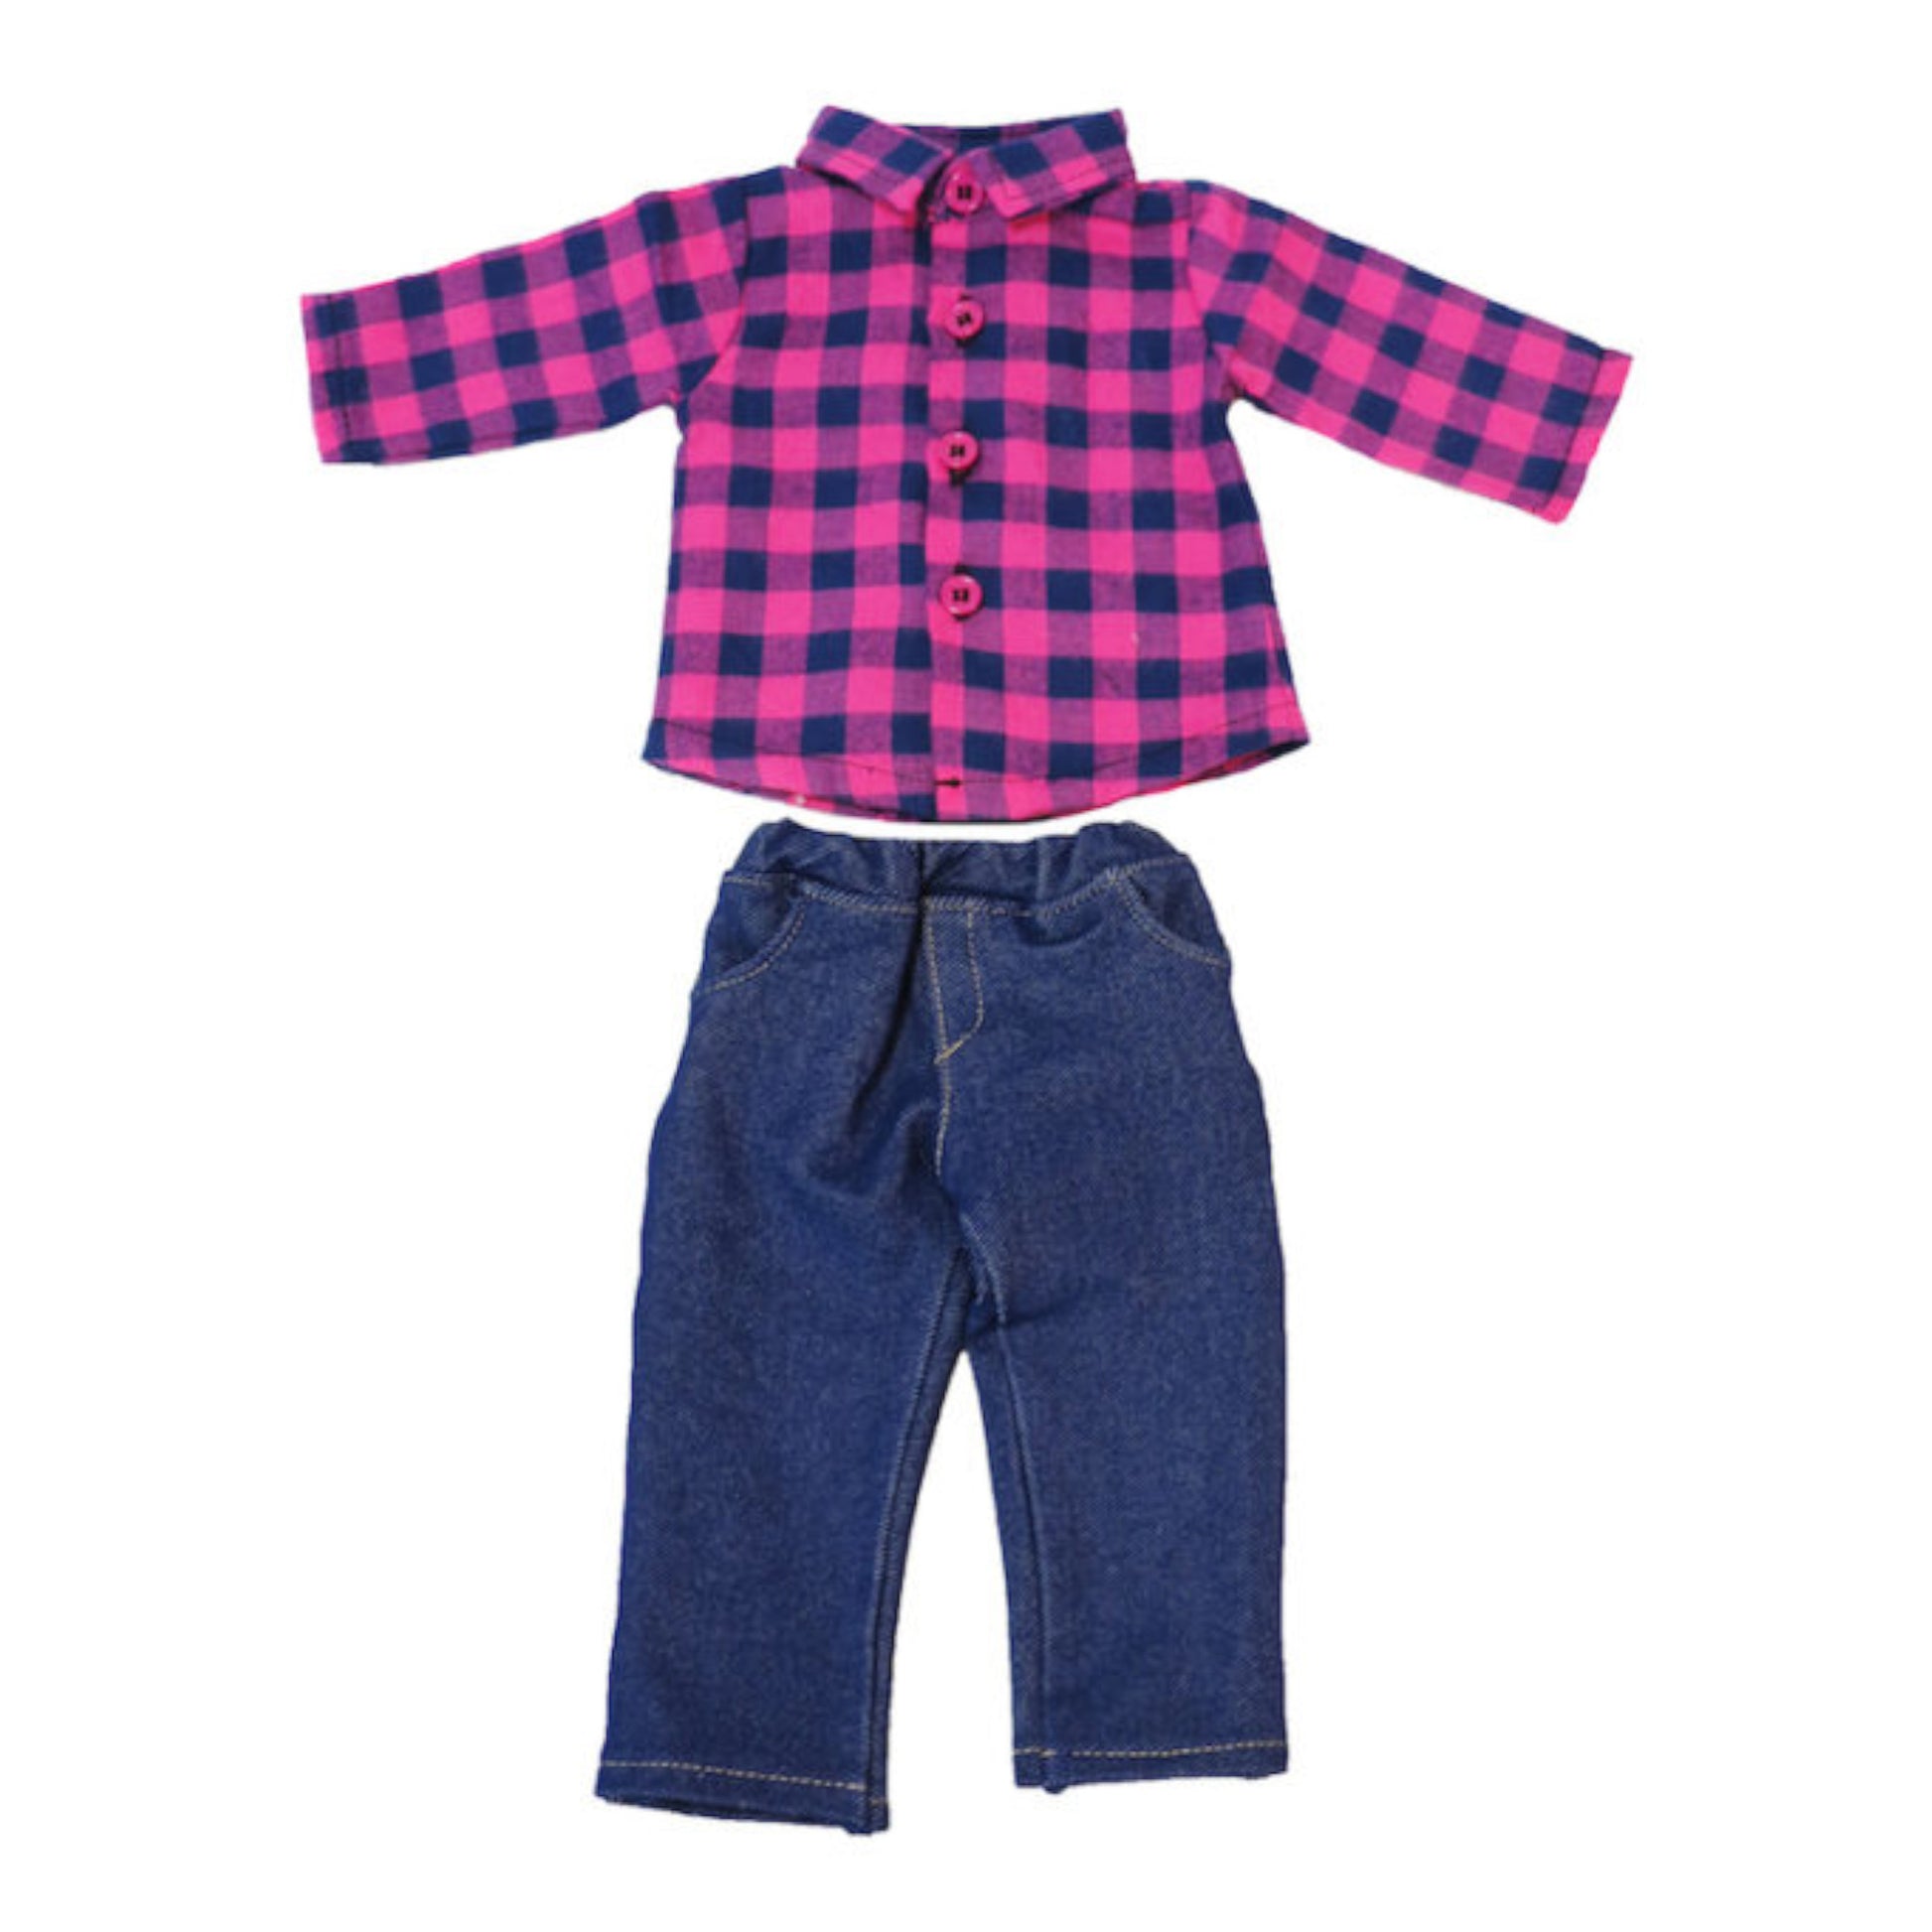 Navy and Pink Checkered Outfit for 18-inch dolls Flat